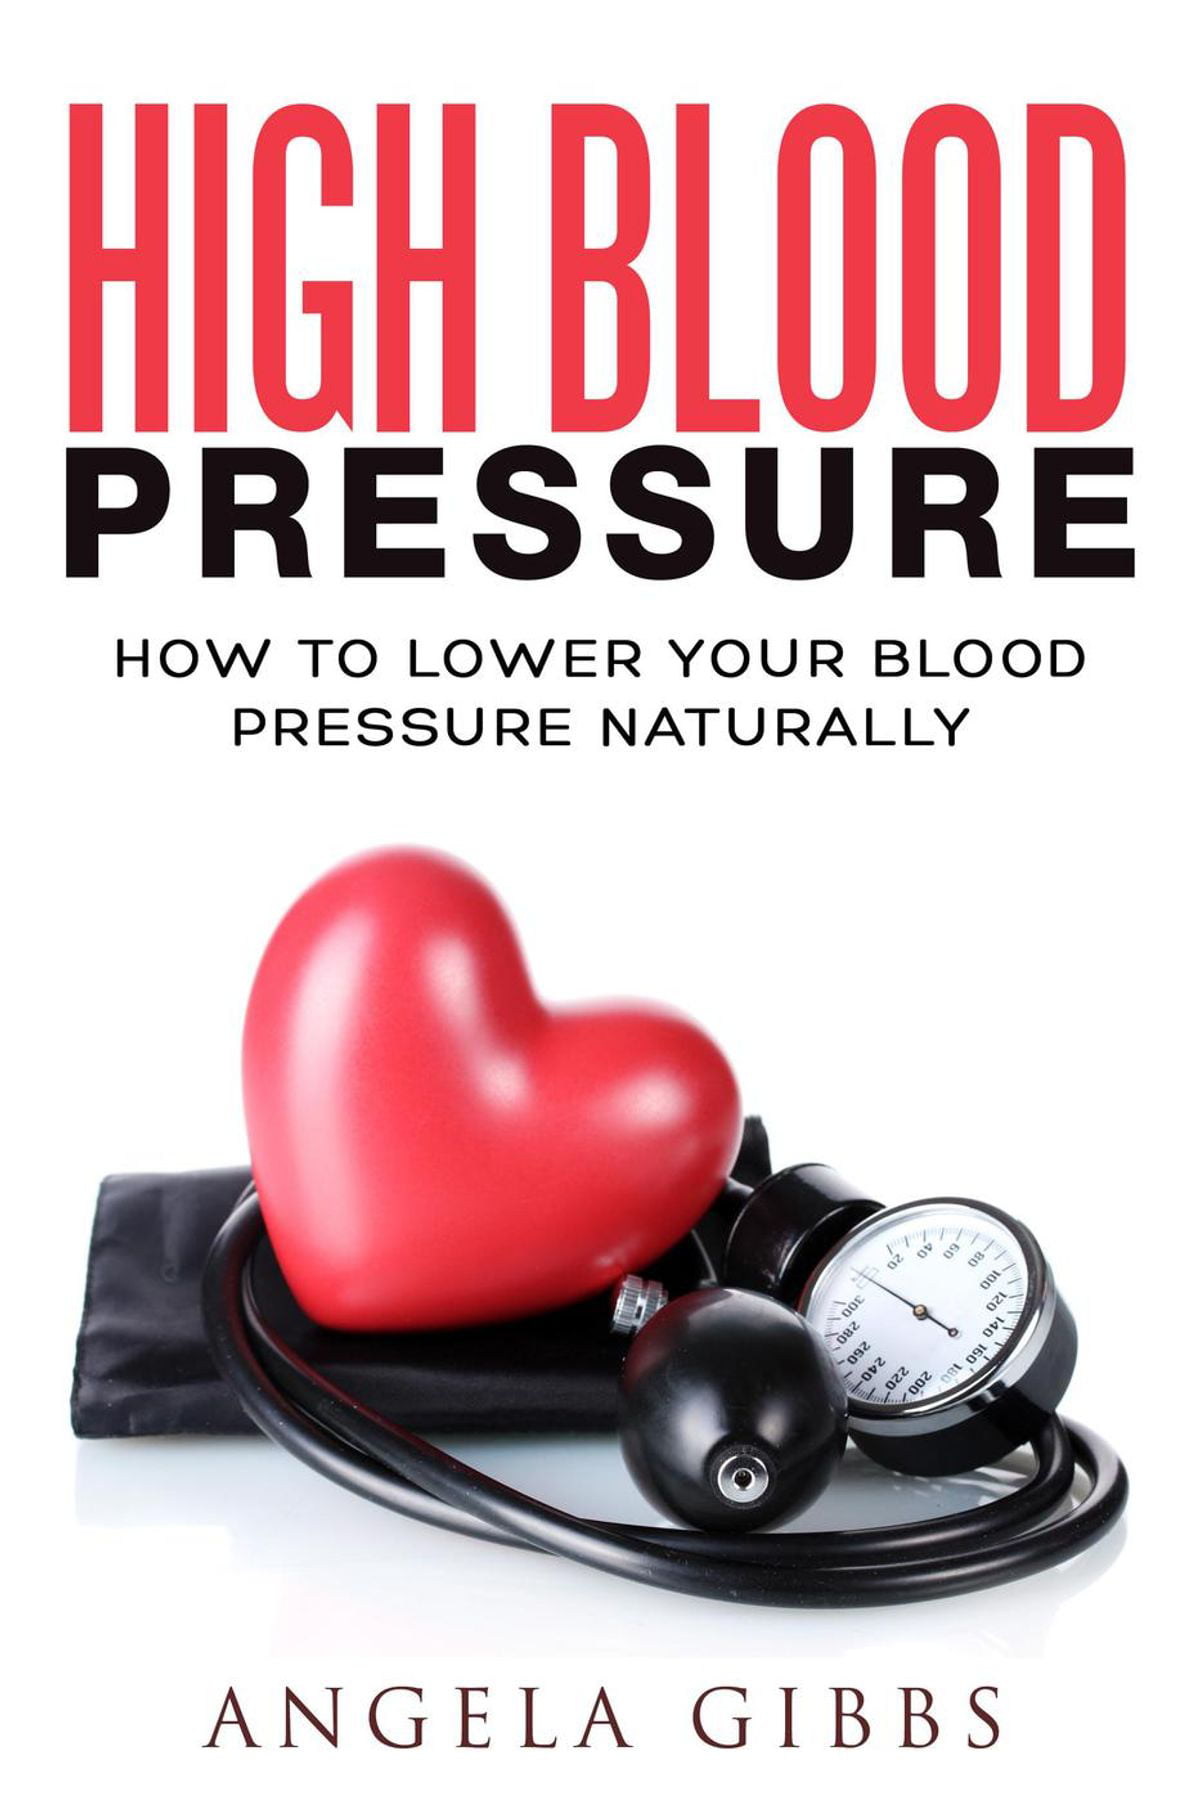 High Blood Pressure How to Lower Your Blood Pressure Naturally eBook